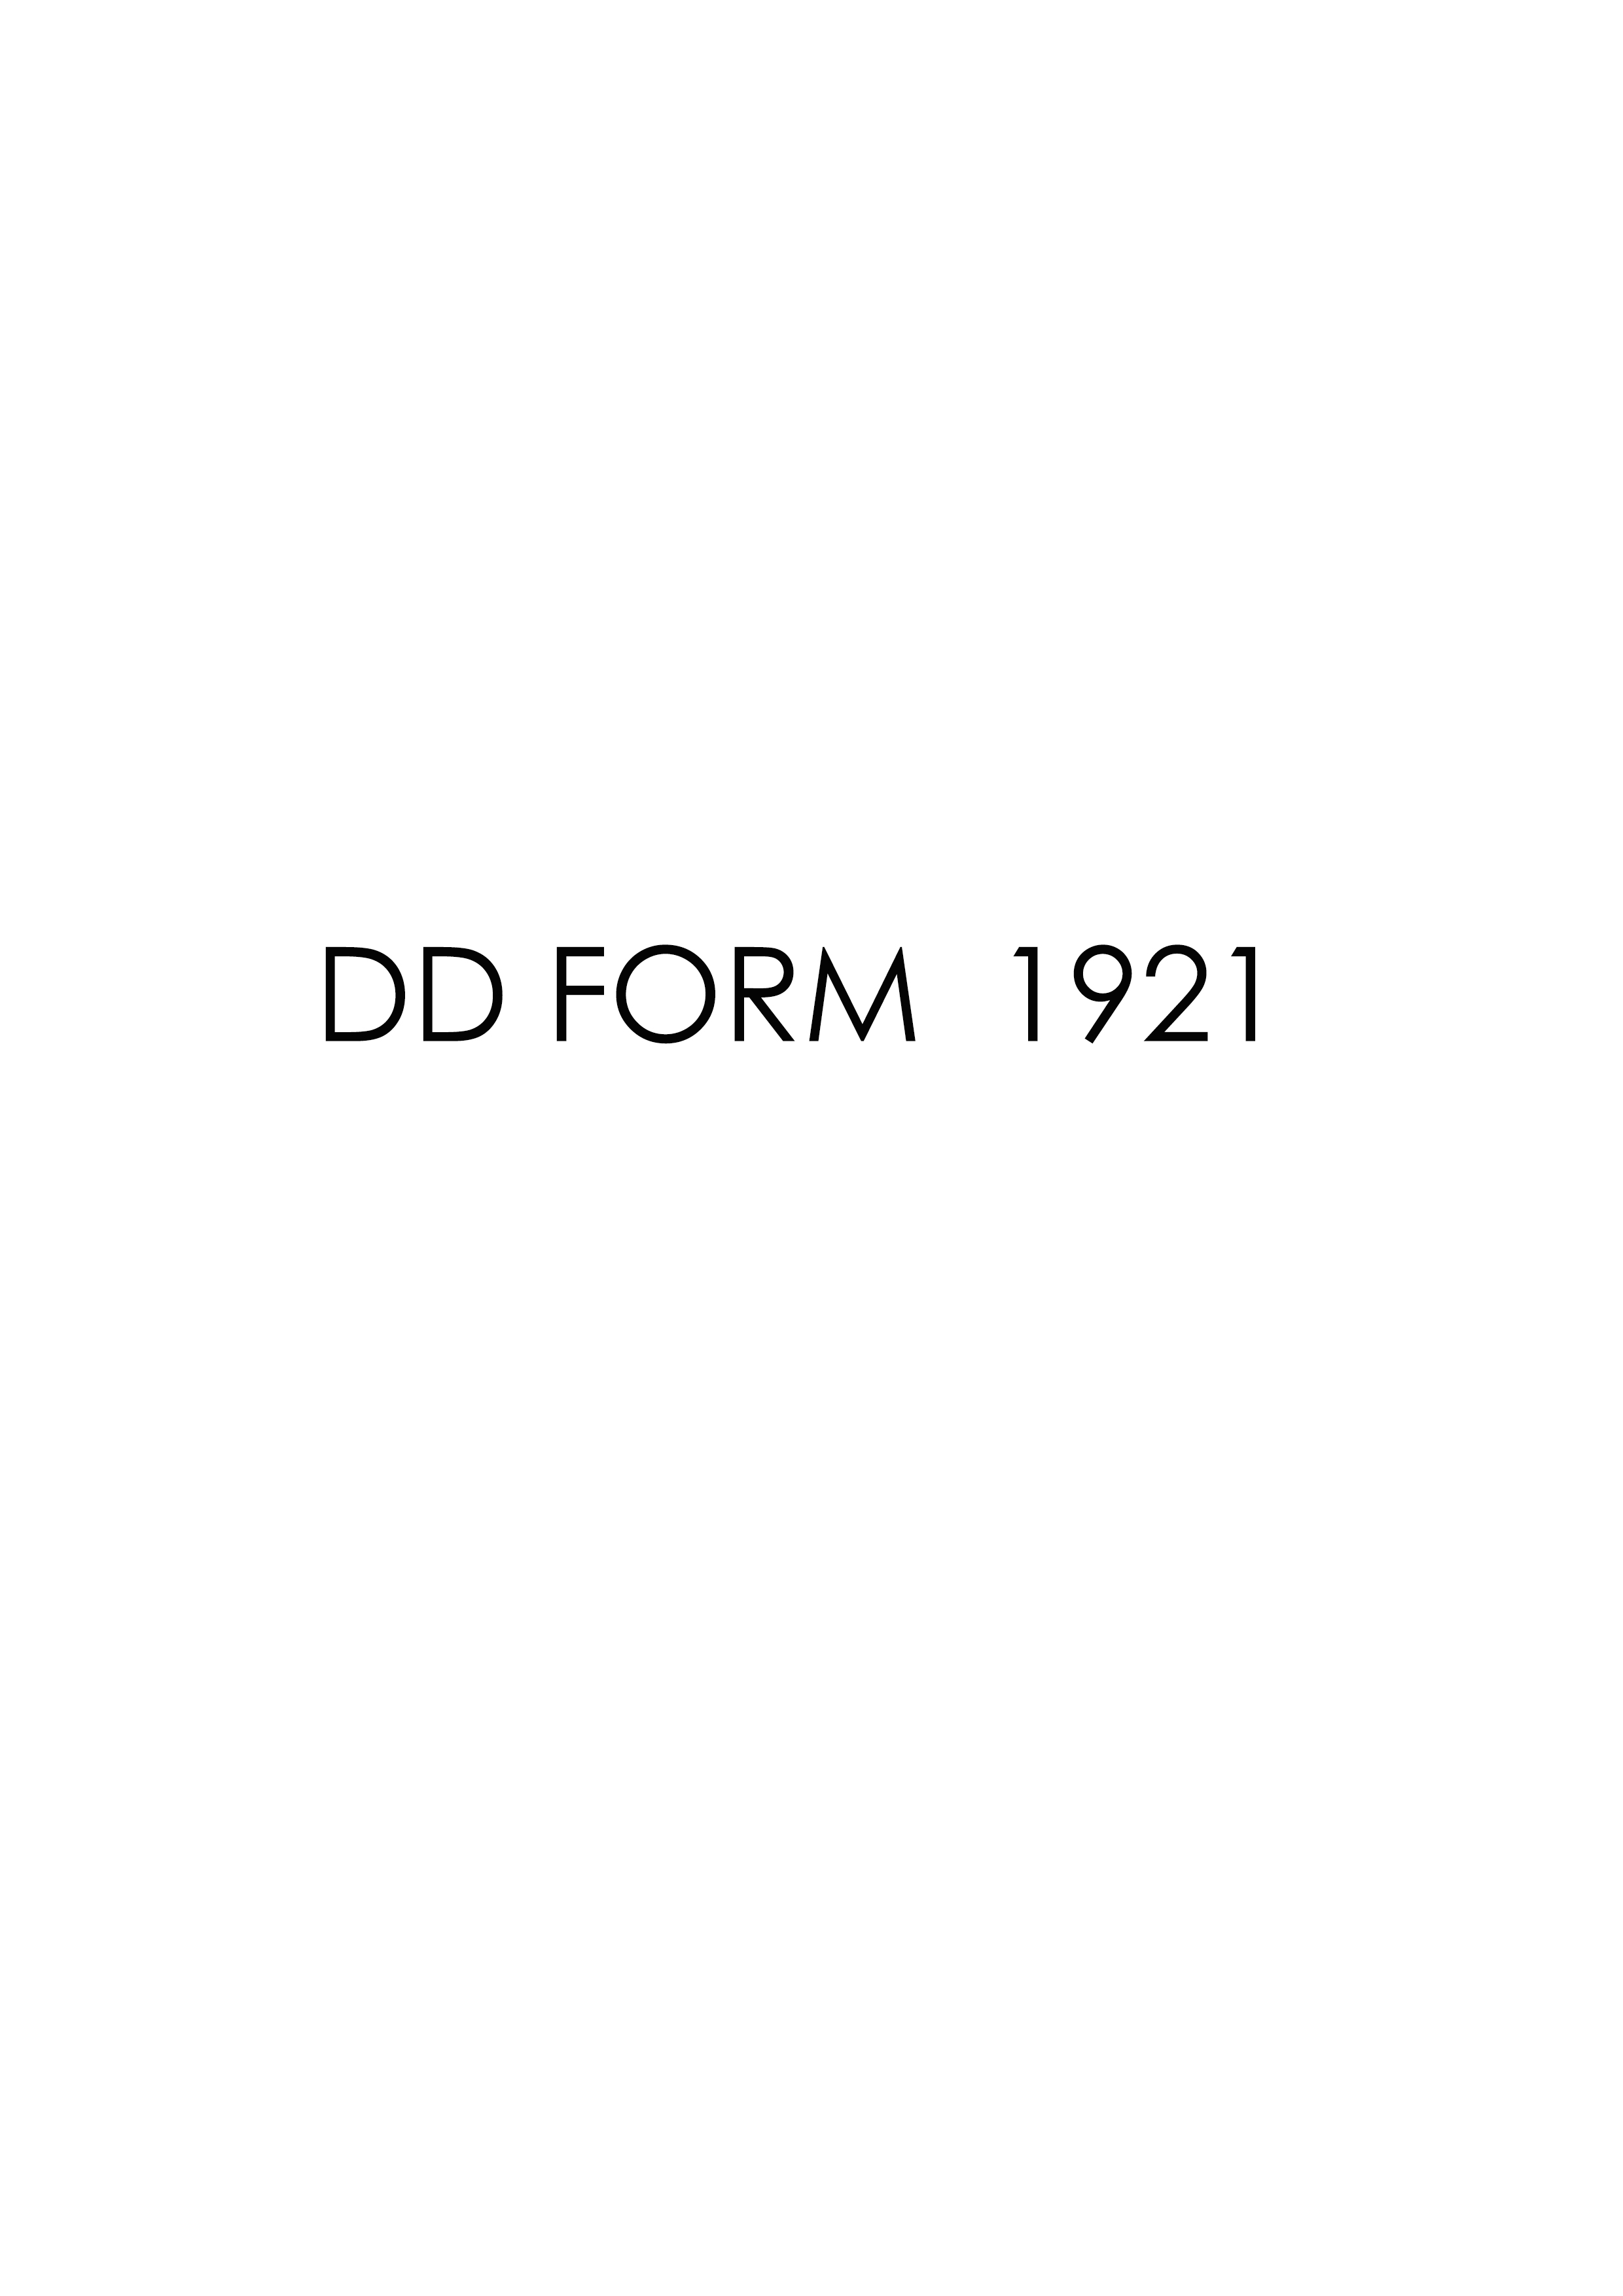 Download Fillable dd Form 1921